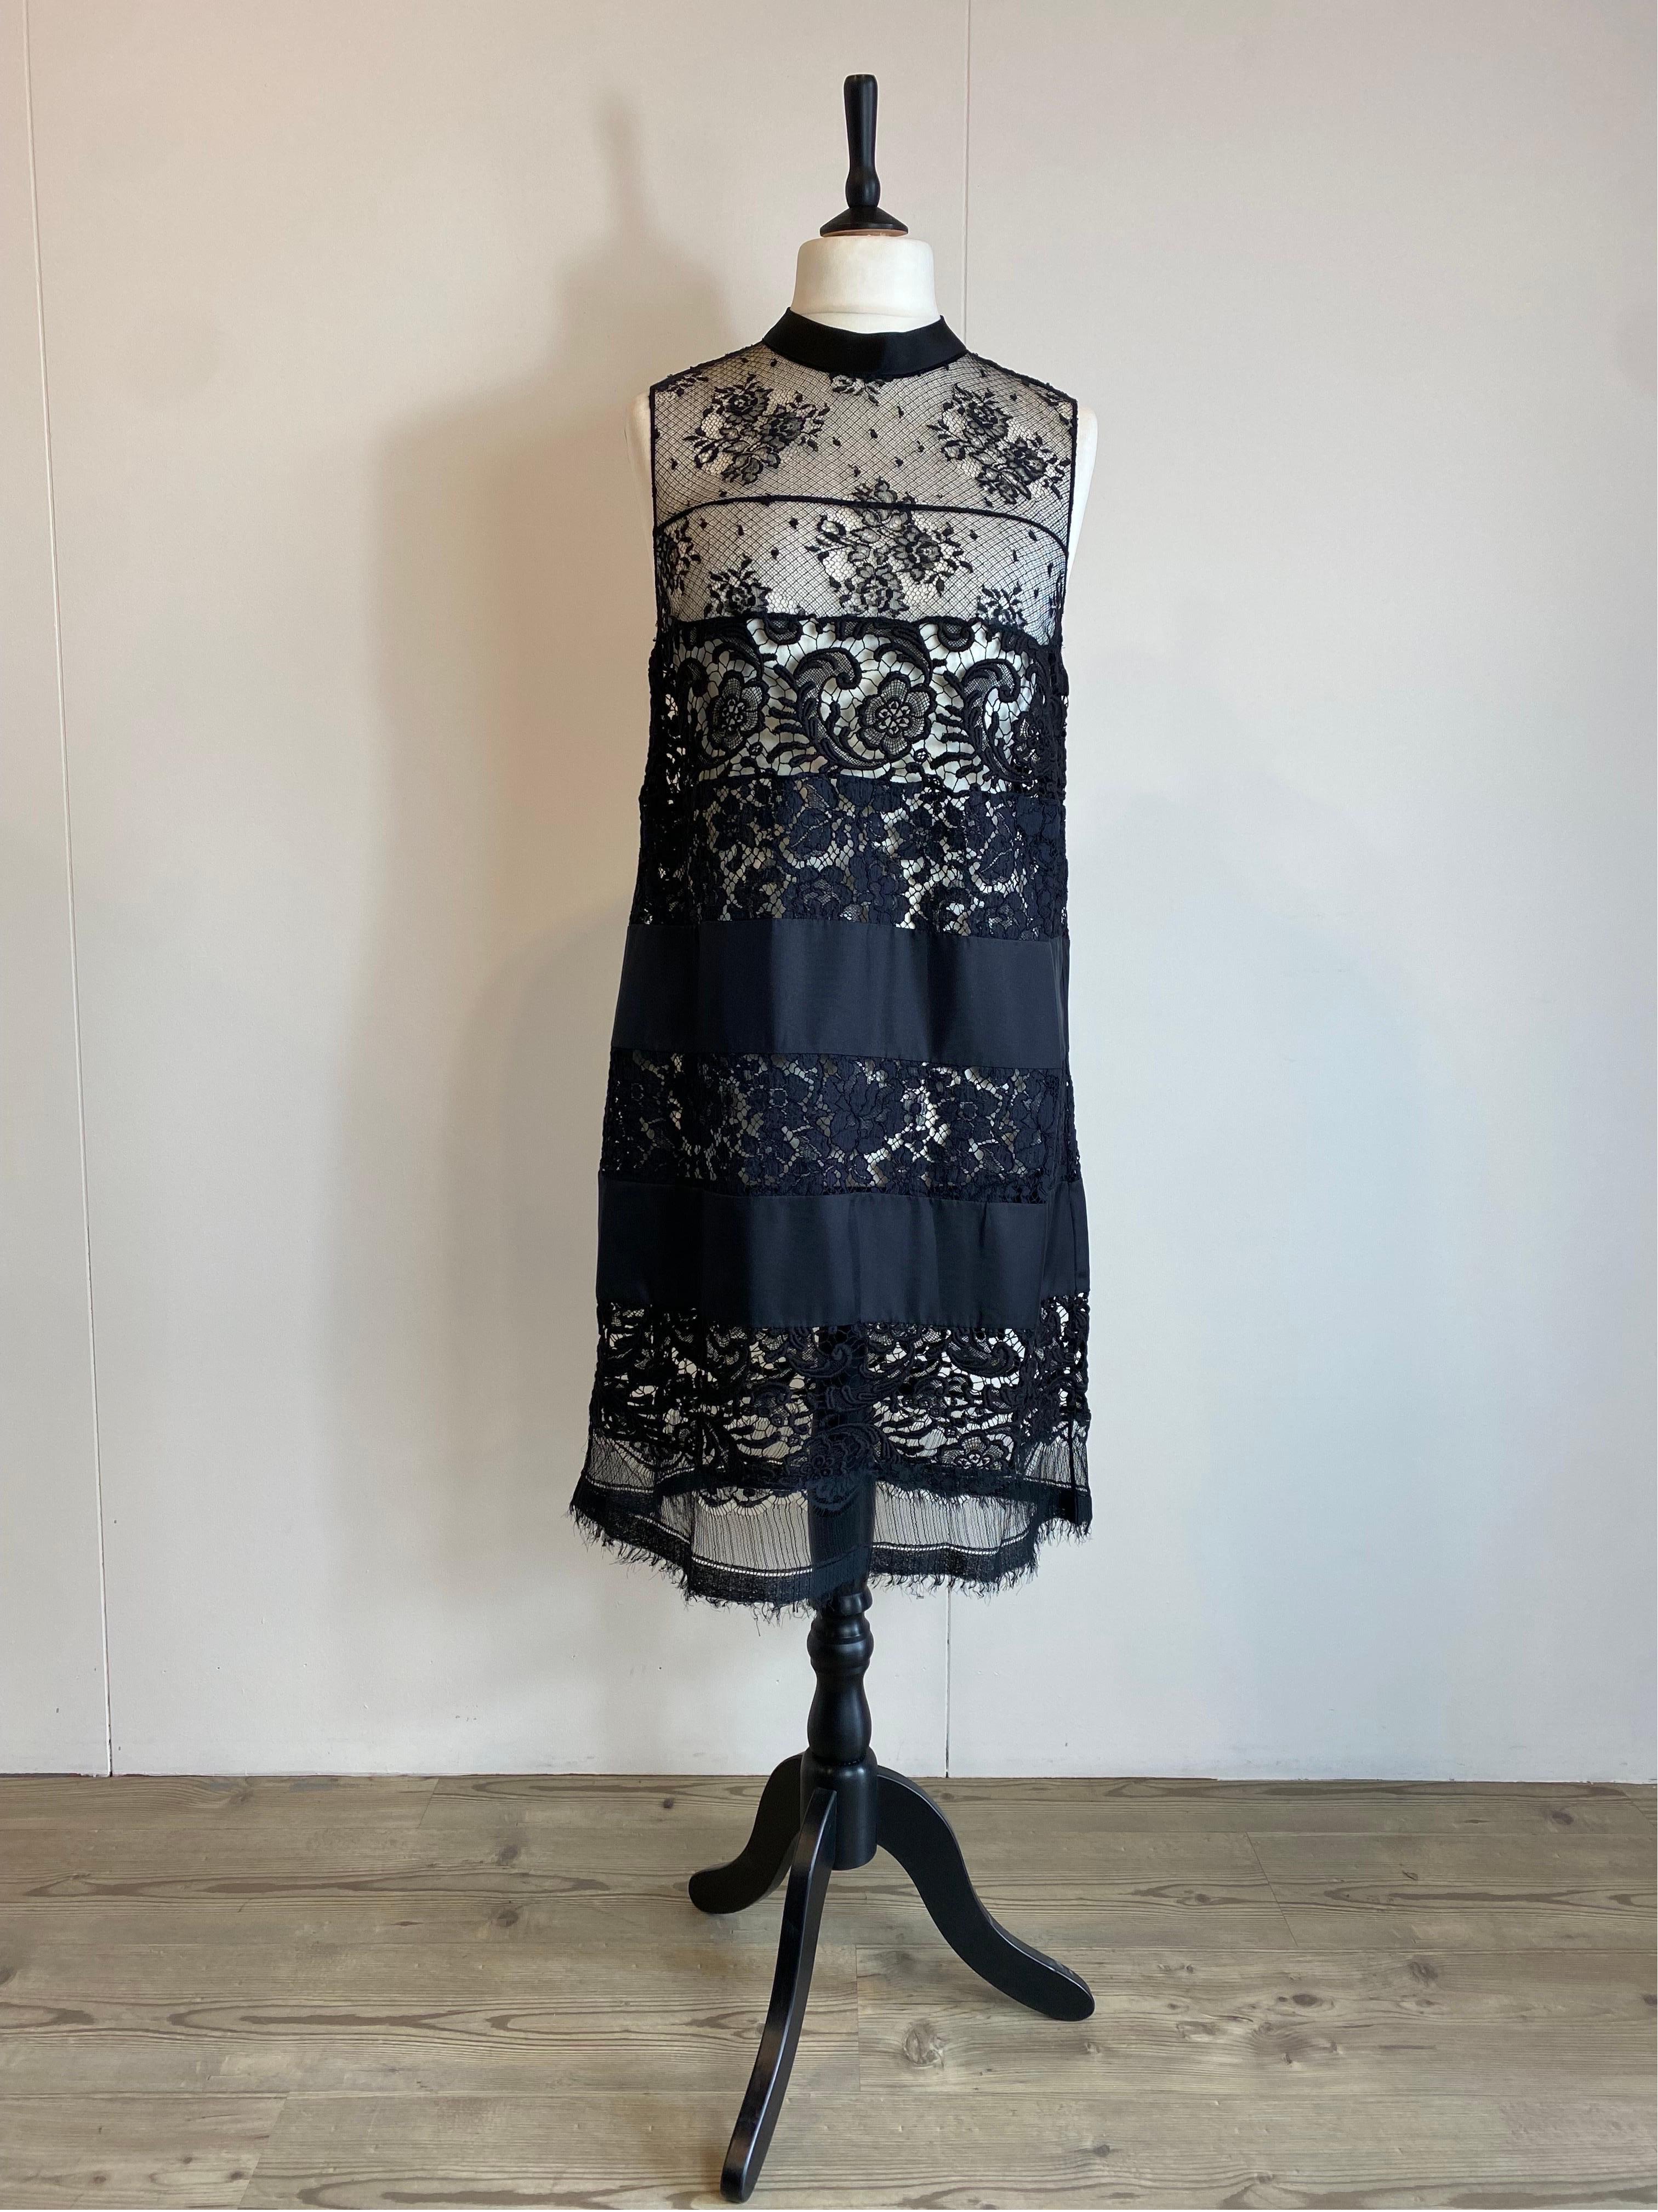 Prada dress.
Composition label missing.
We think it's a silk and lace blend.
Italian size 46.
Shoulders 37 cm
Bust 46 cm
Length 99 cm
Excellent general condition, with minimal signs of normal use.